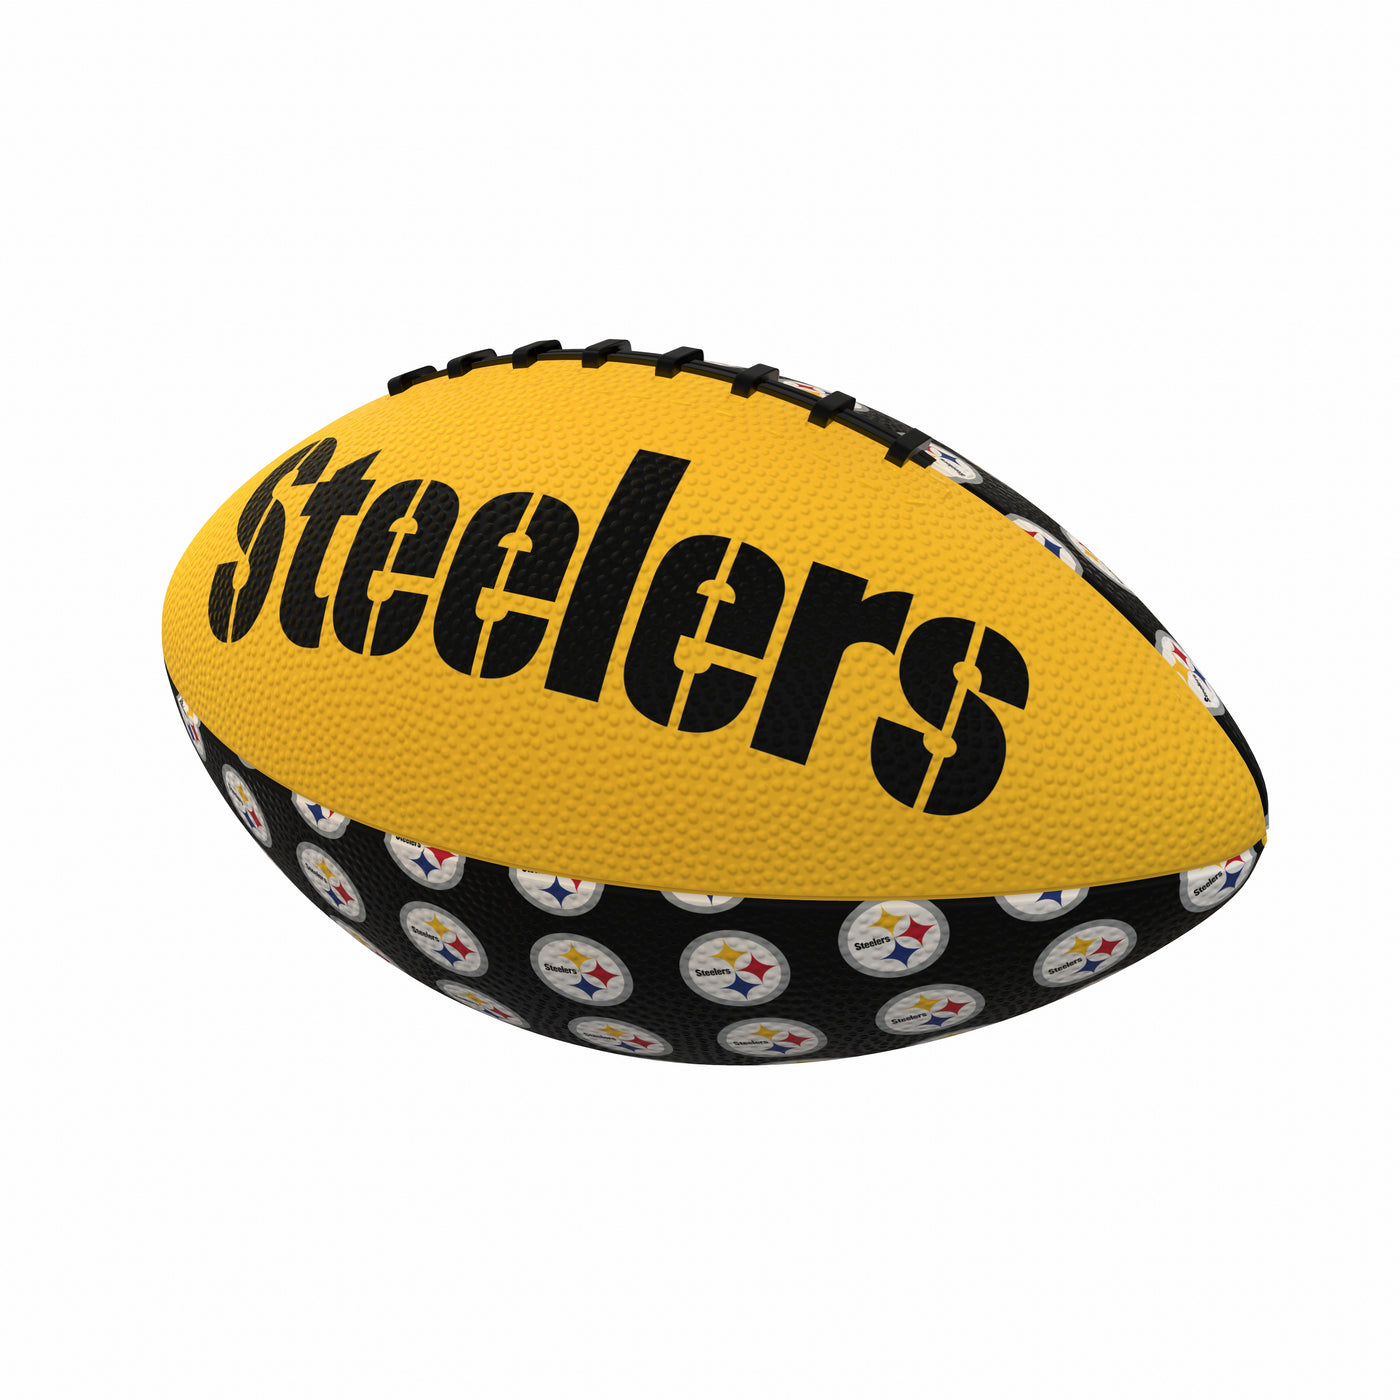 Pittsburgh Steelers Repeating Mini-Size Rubber Football